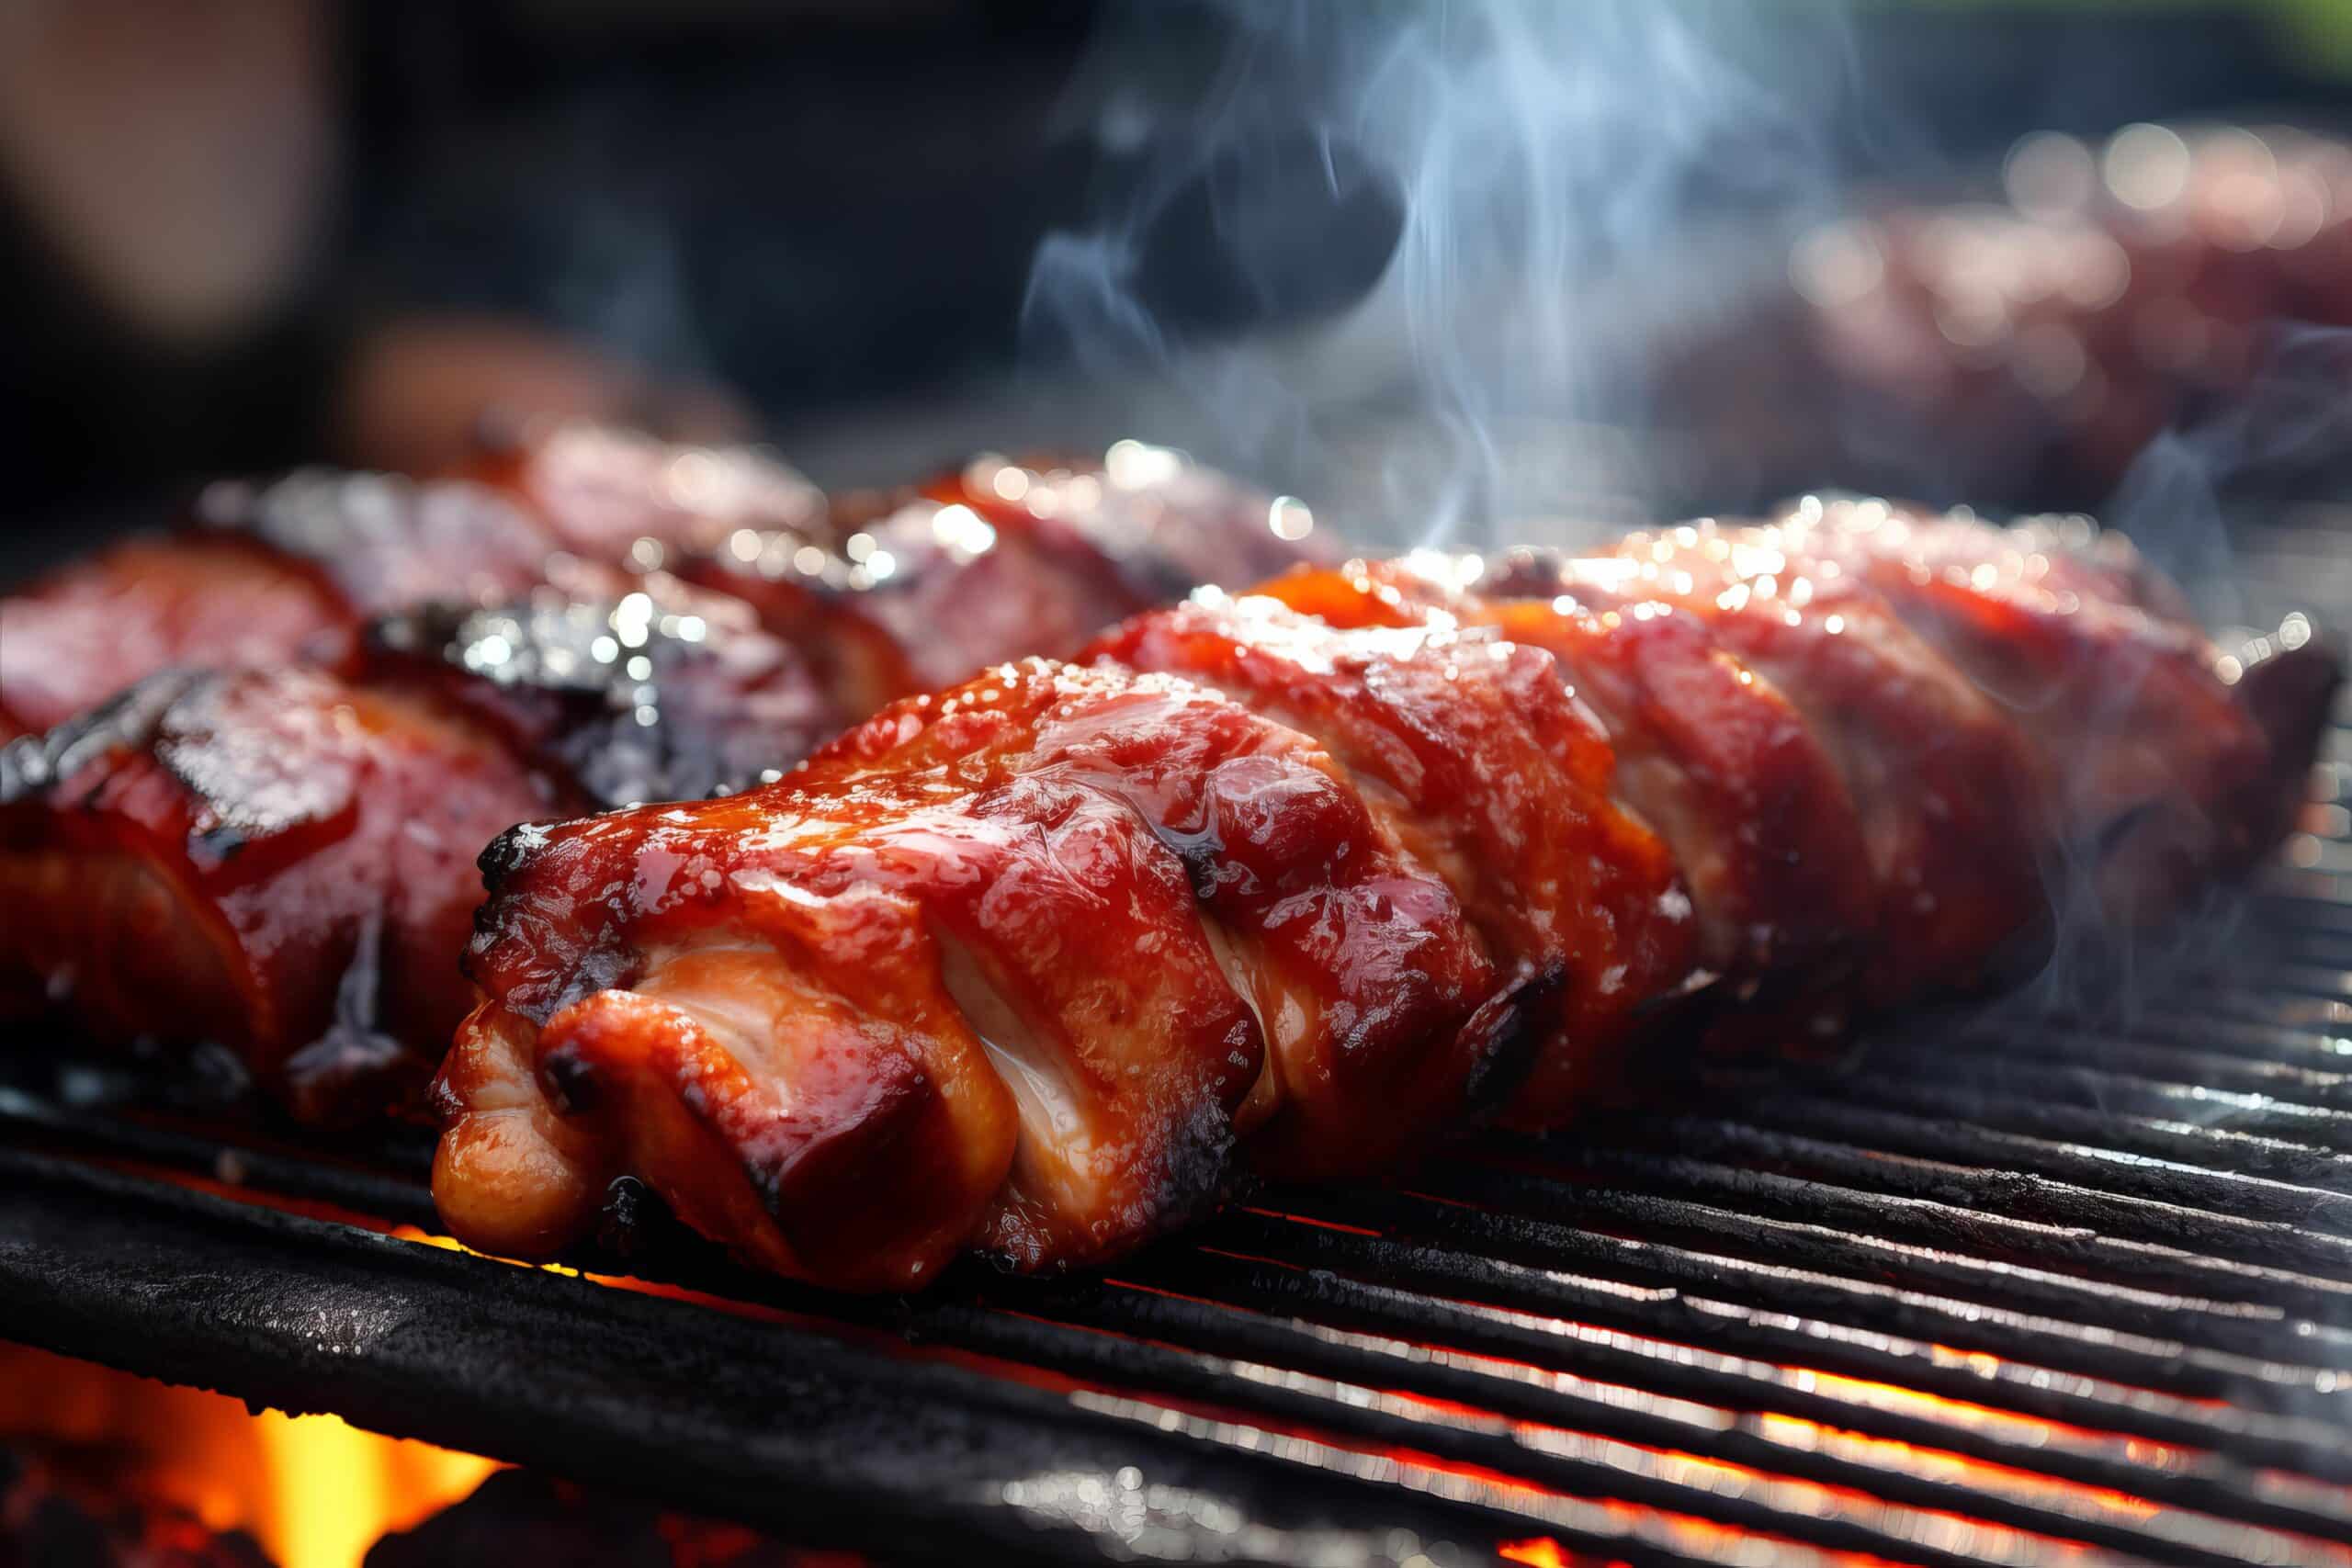 www.appr.com : How Long To Grill Pork Ribs On Gas Grill?